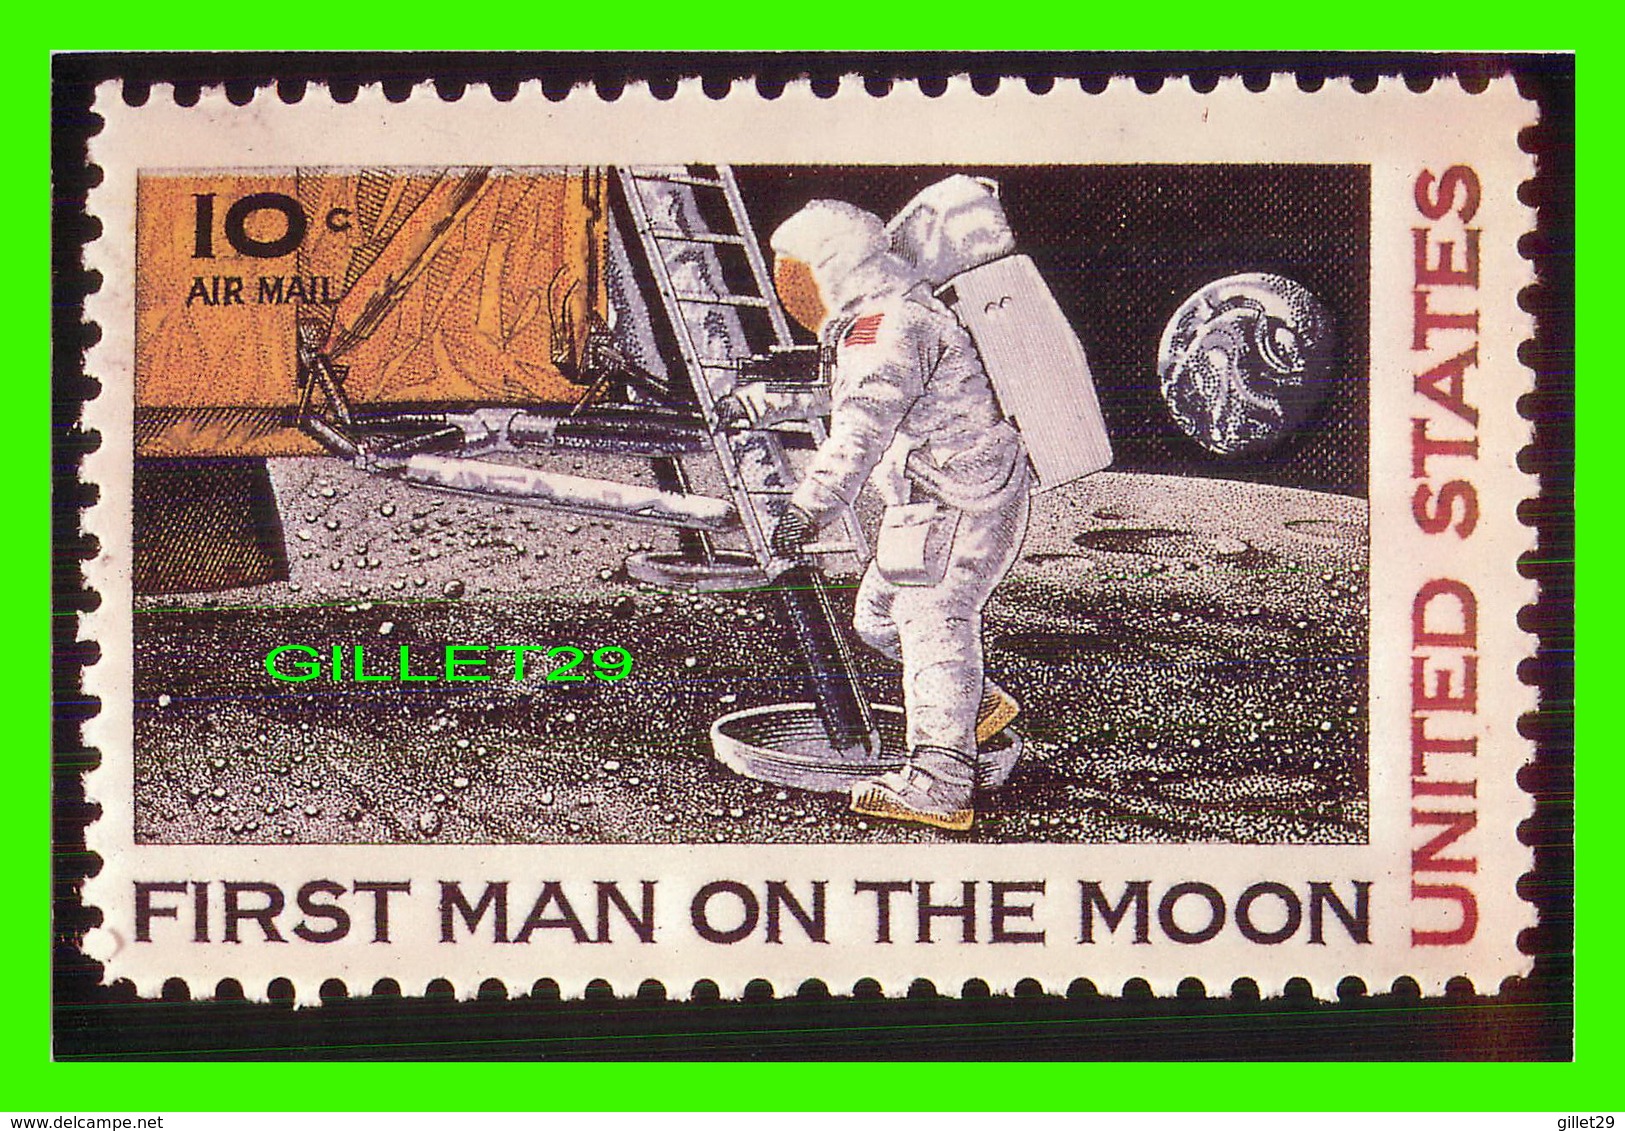 LA POSTE - UNITED STATES POSTAL SERVICES - FIRST MAN ON THE MOON, 10c AIR MAIL STAMP - NATIONAL MUSEUM 1991 - - Poste & Facteurs